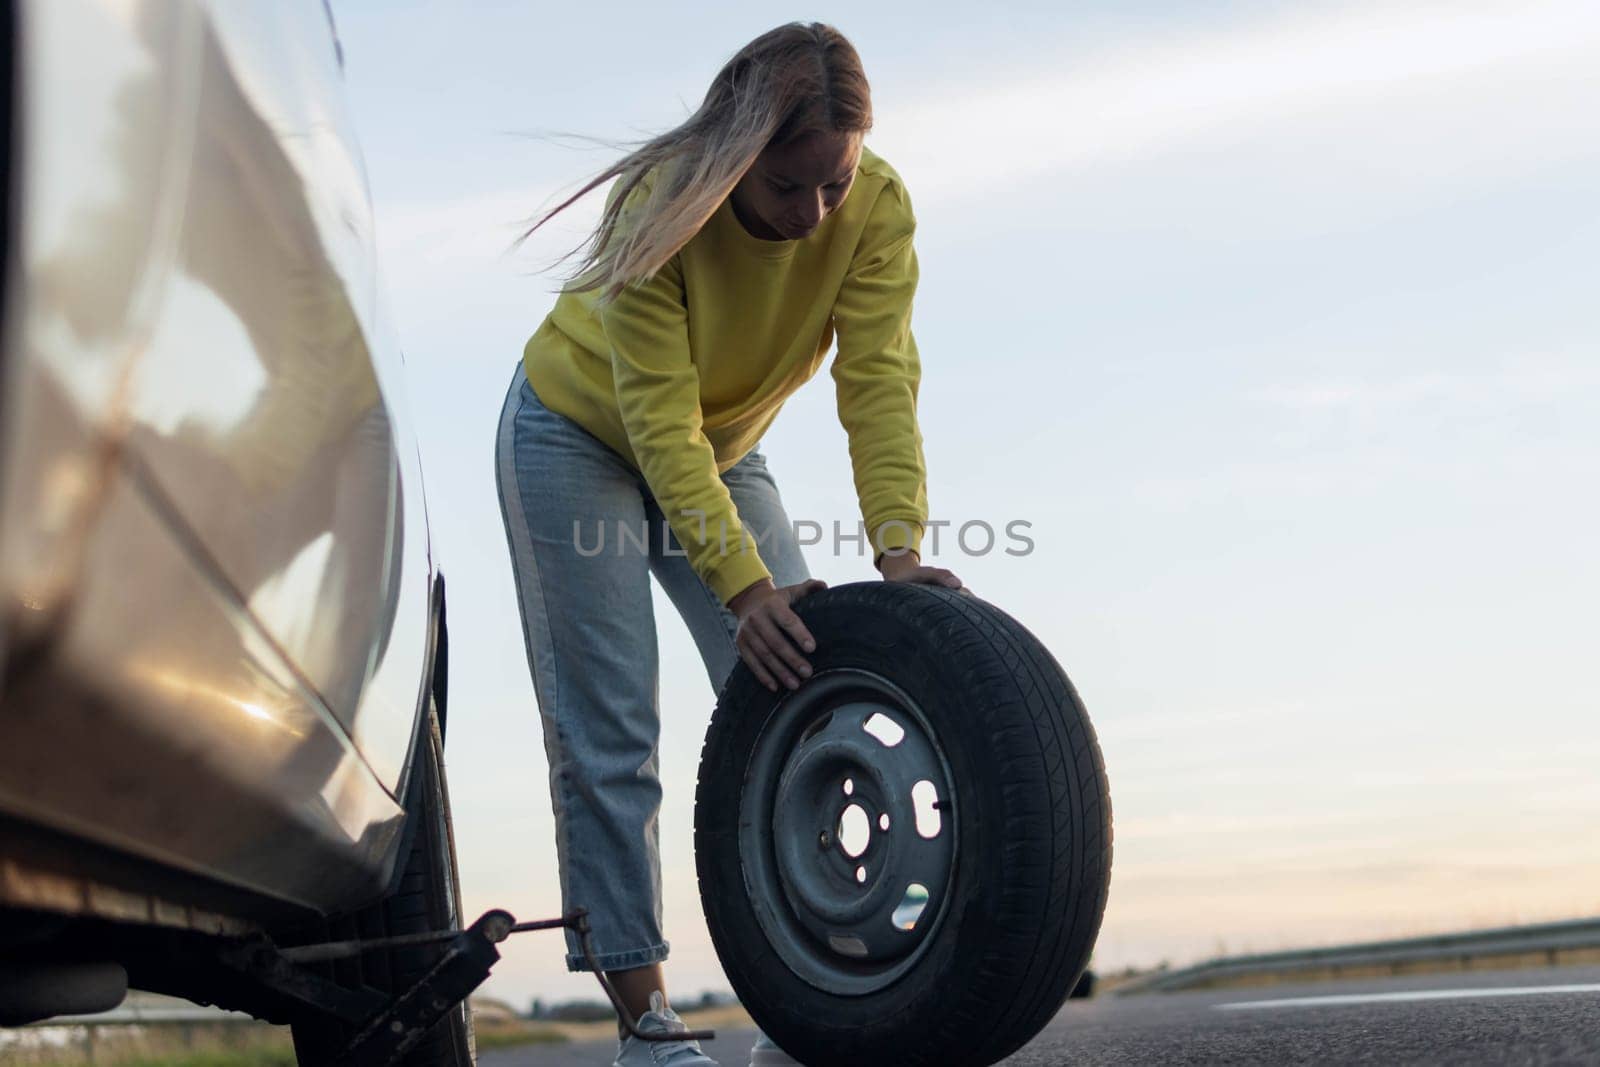 girl stands near the rear wheel of the car and rolls the spare wheel to change, the wheel has been pierced. Close-up High quality photo